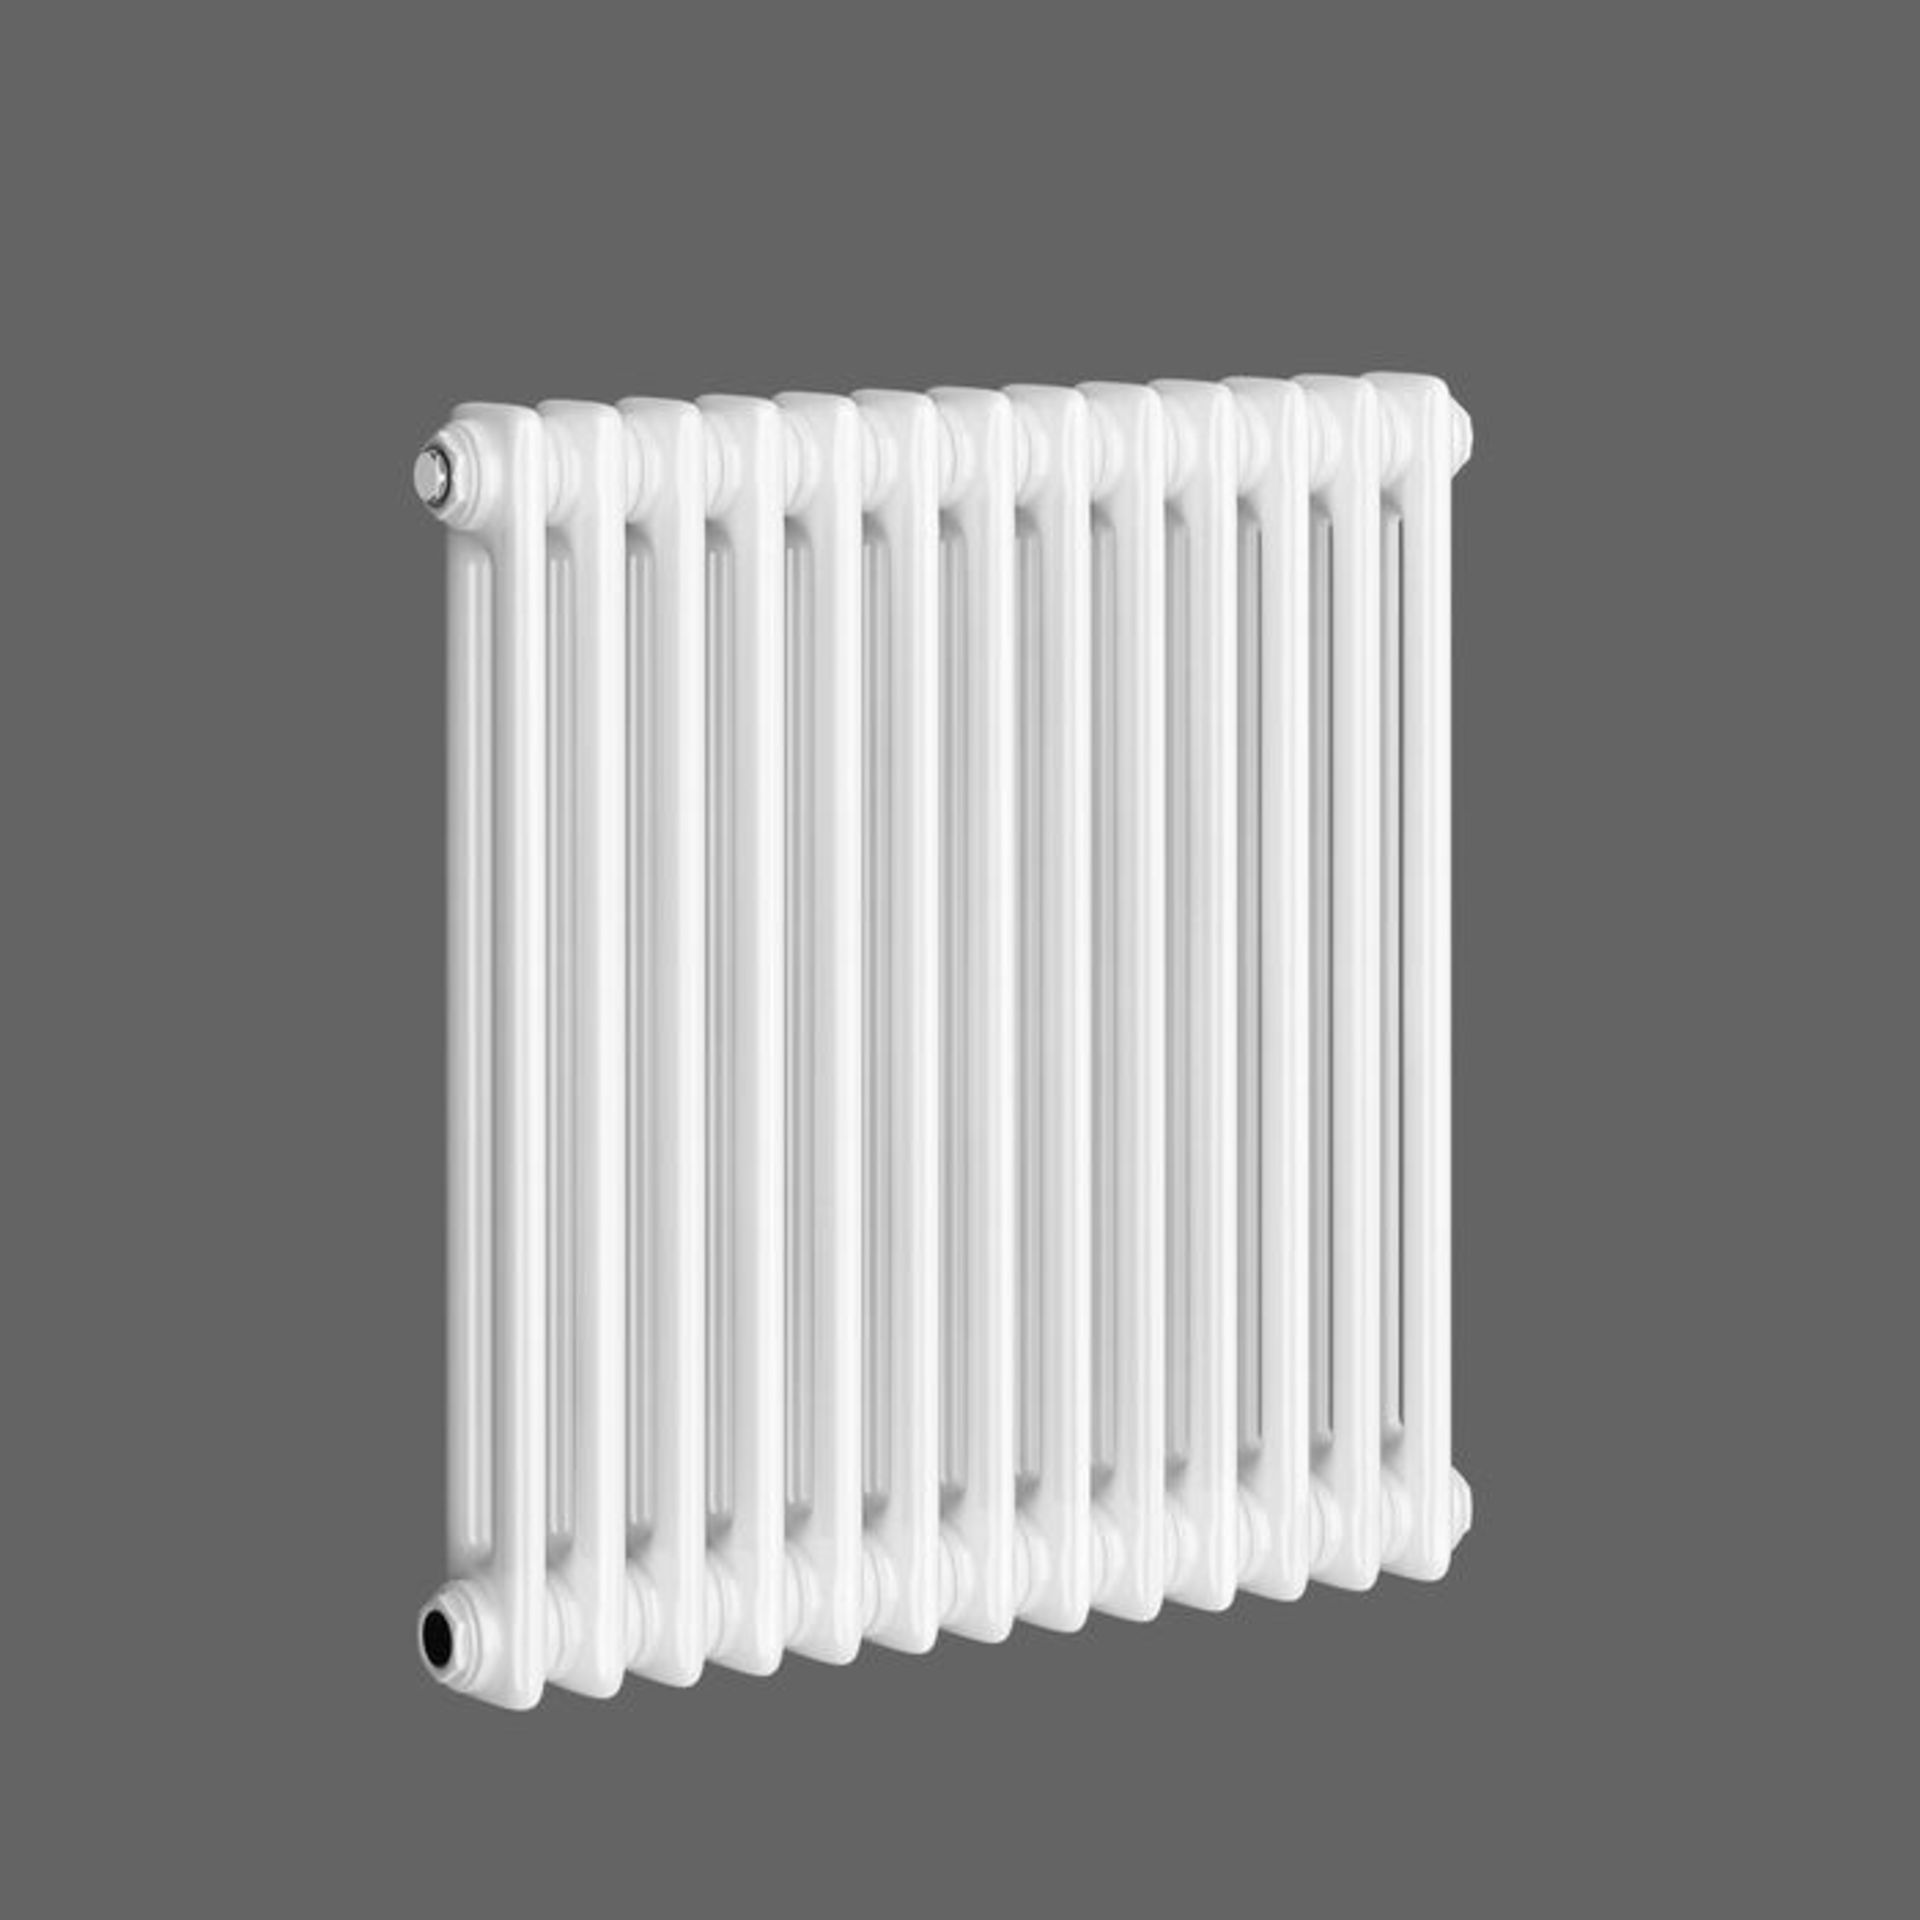 (PC89) 600x628mm White Double Panel Horizontal Colosseum Traditional Radiator. RRP £395.99.F...( - Image 2 of 4